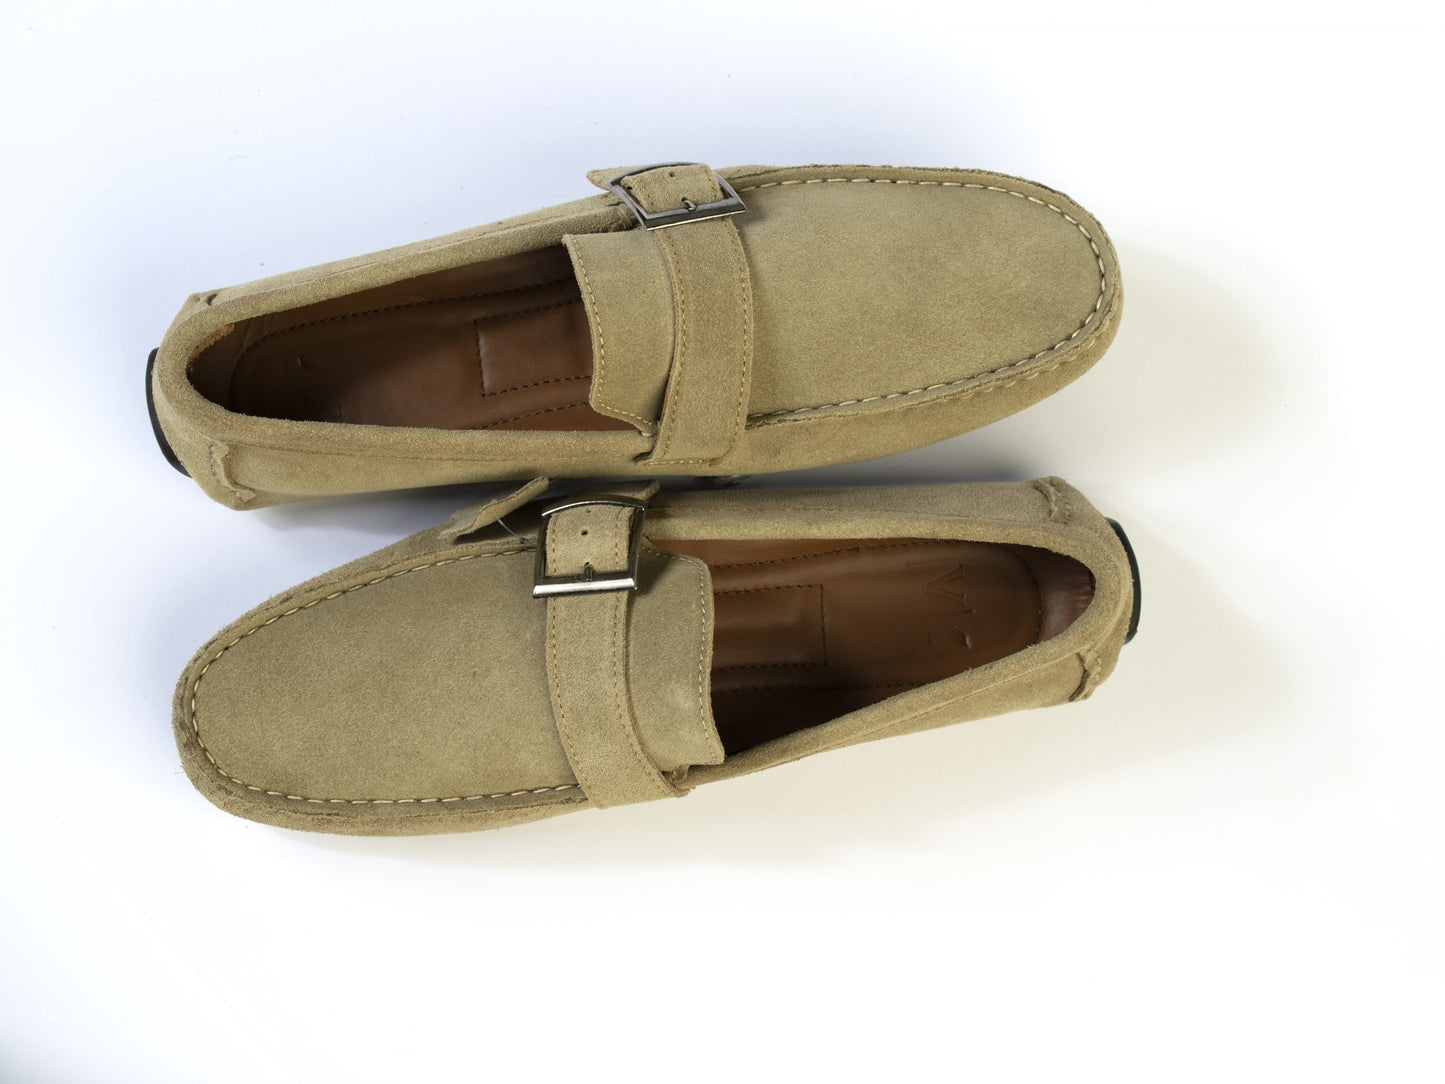 Suede Loafer Beige with Buckle